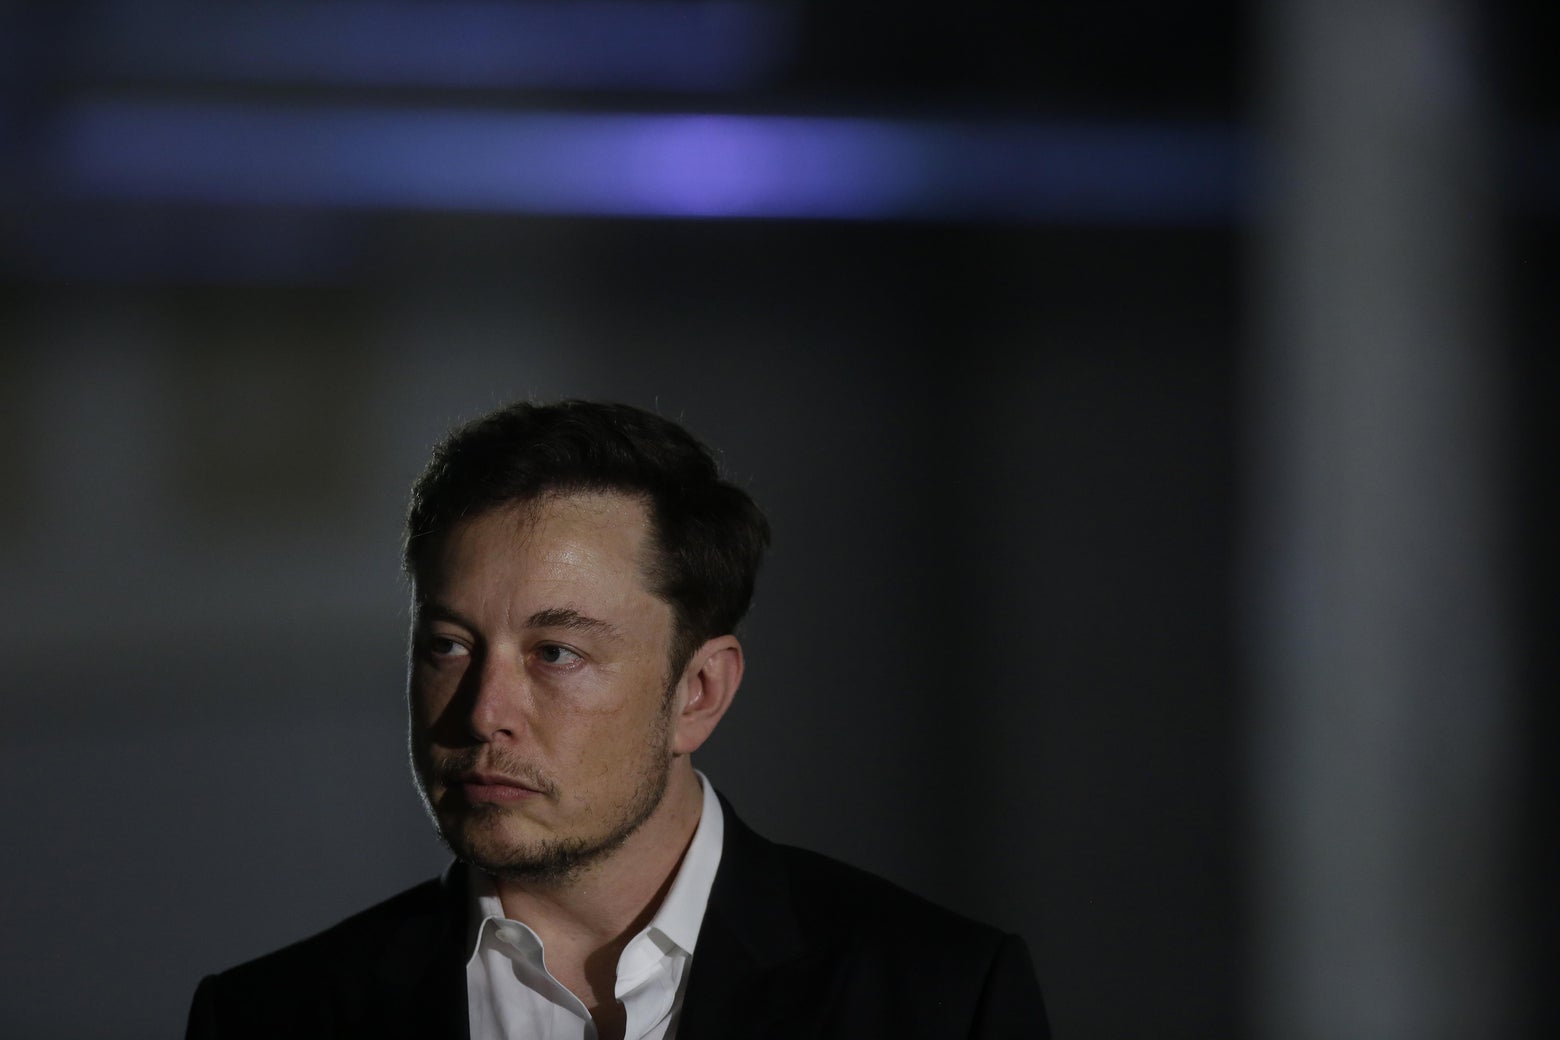 Elon Musk Needs to Stop Tweeting Things He Can’t Prove